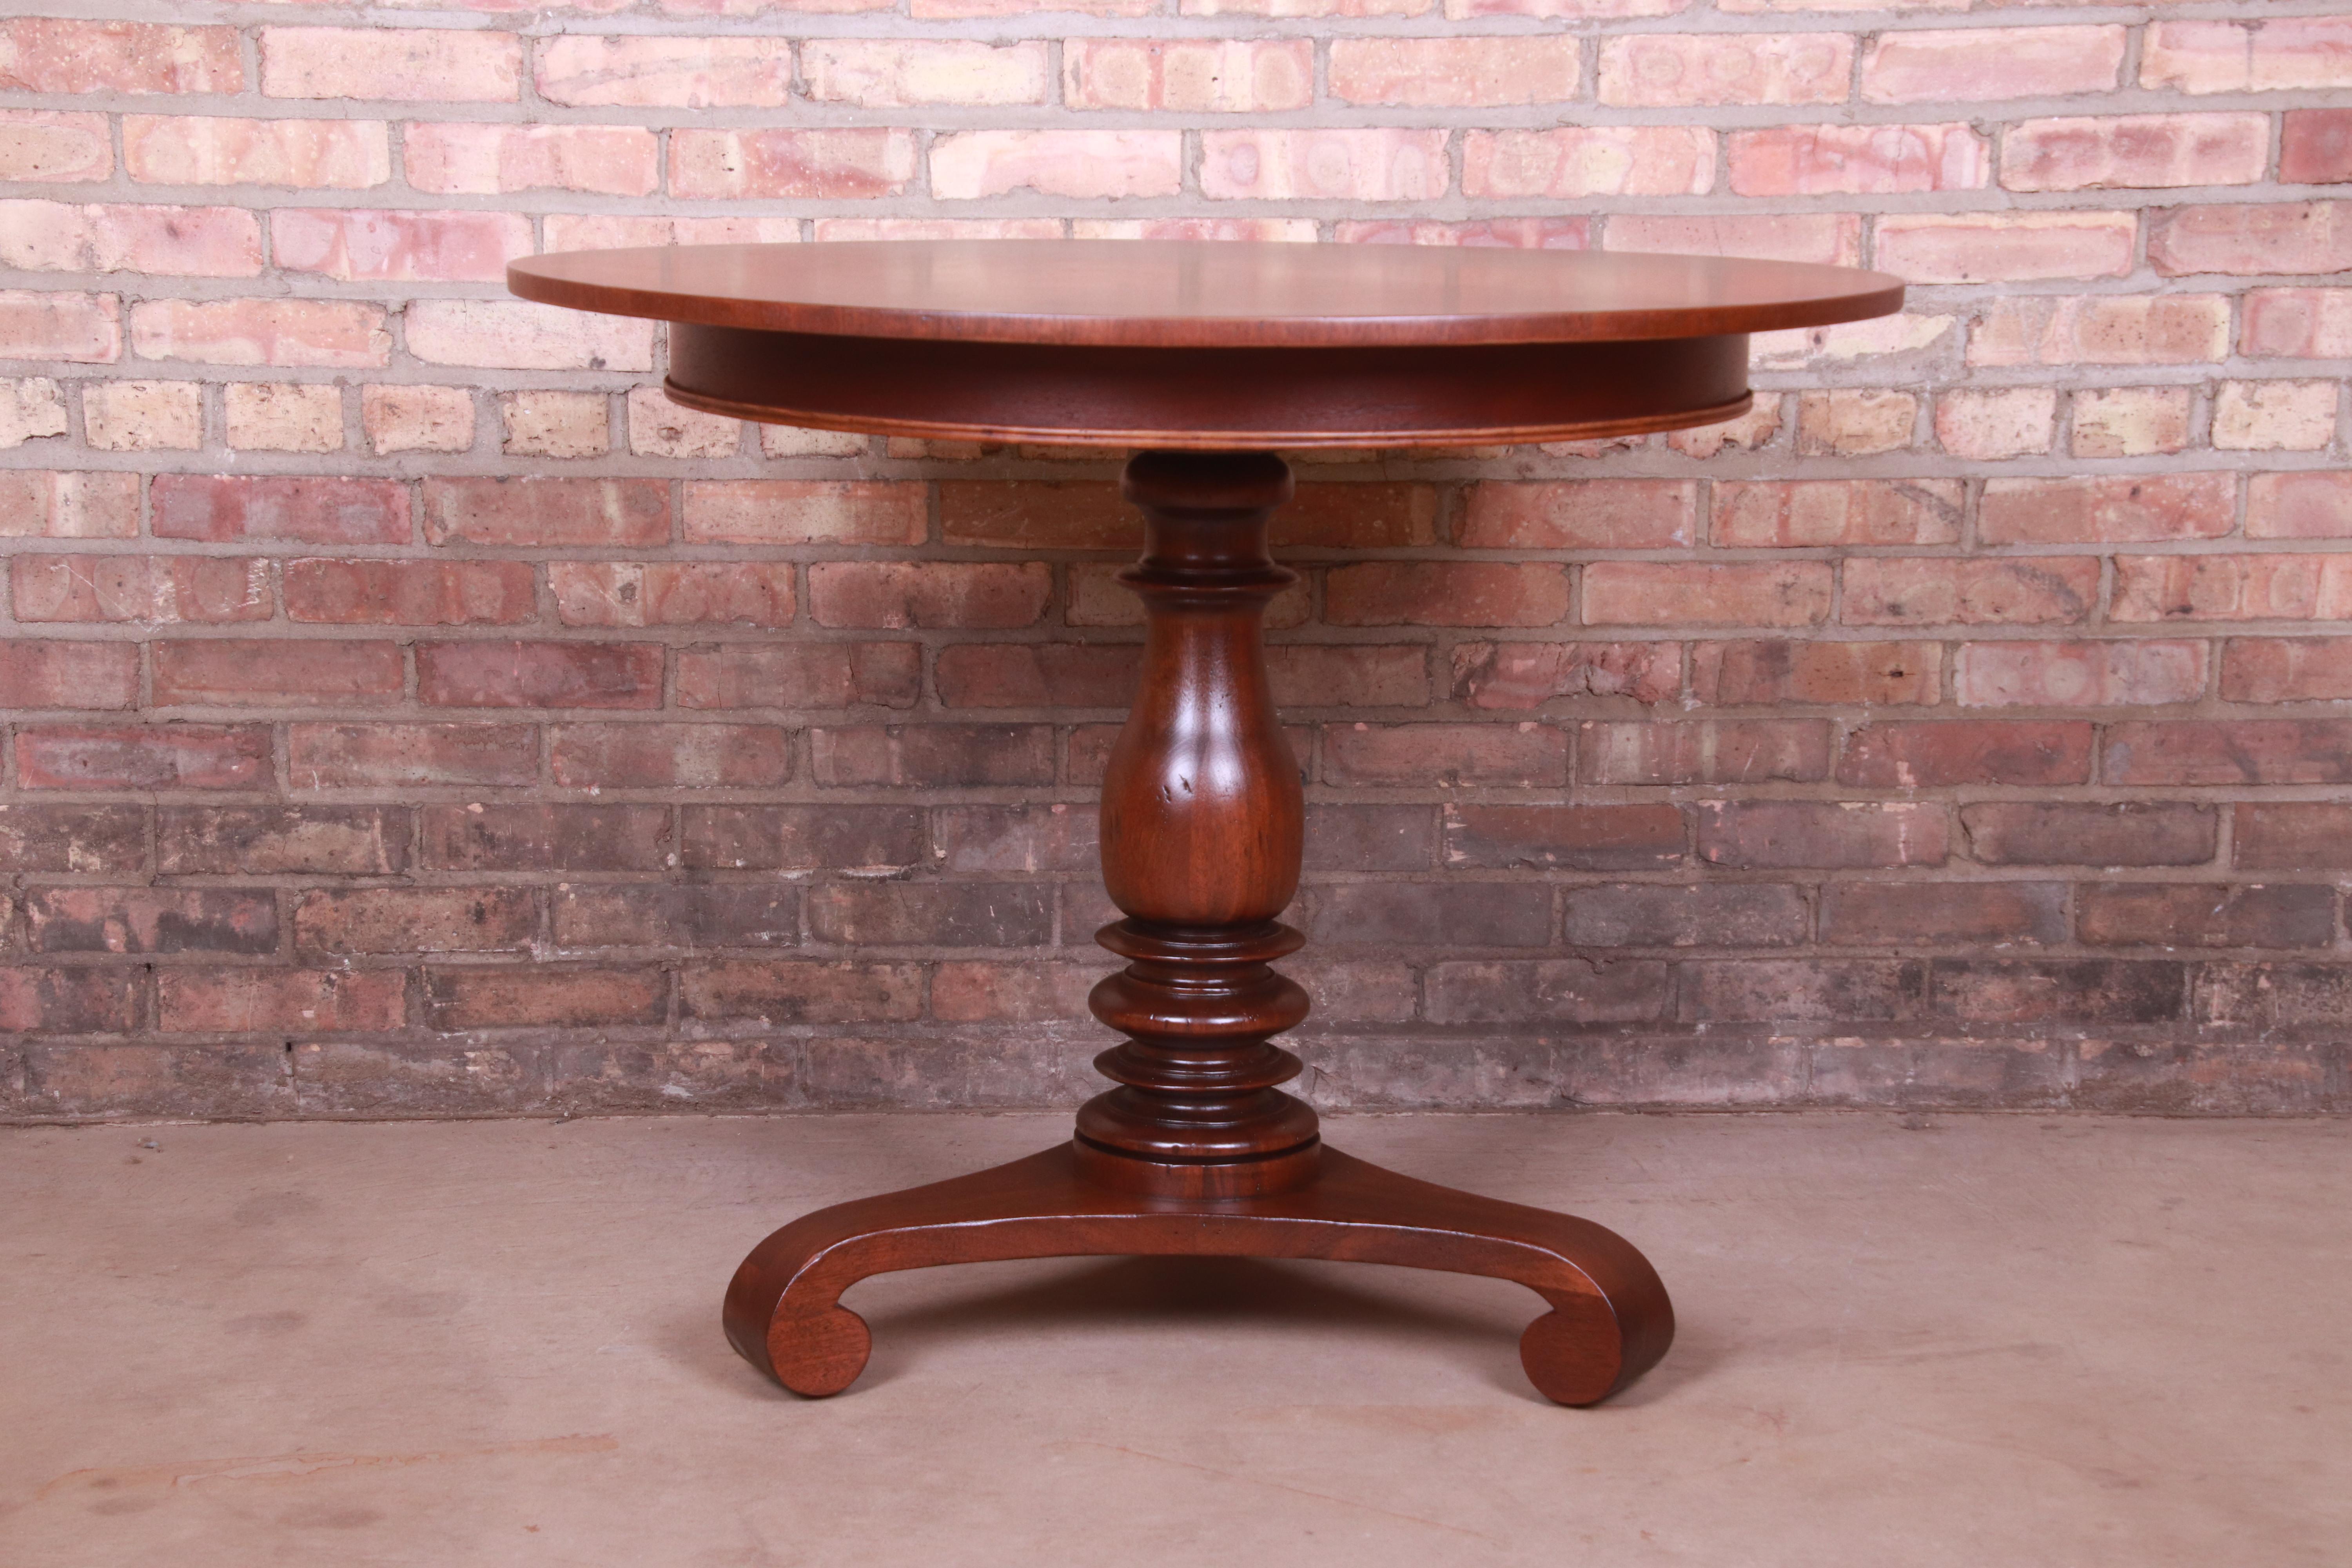 A gorgeous Empire style carved mahogany pedestal tea table or center table

By Baker Furniture, 